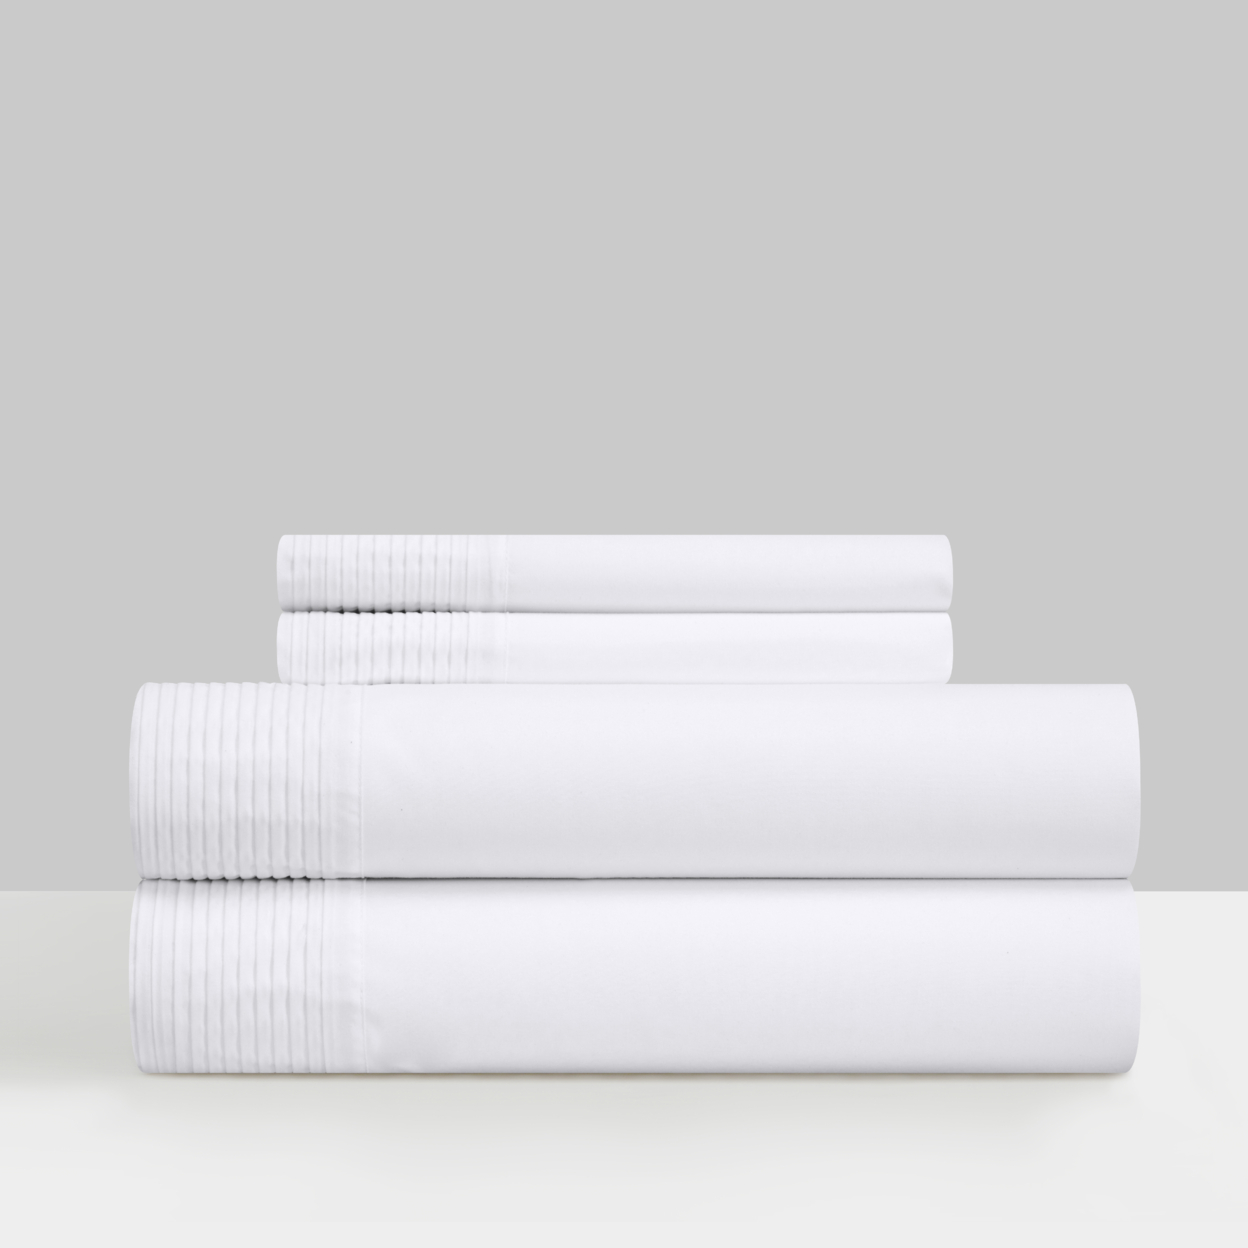 Barley 3 Or 4 Piece Sheet Set Solid Color With Pleated Details - White, Twin